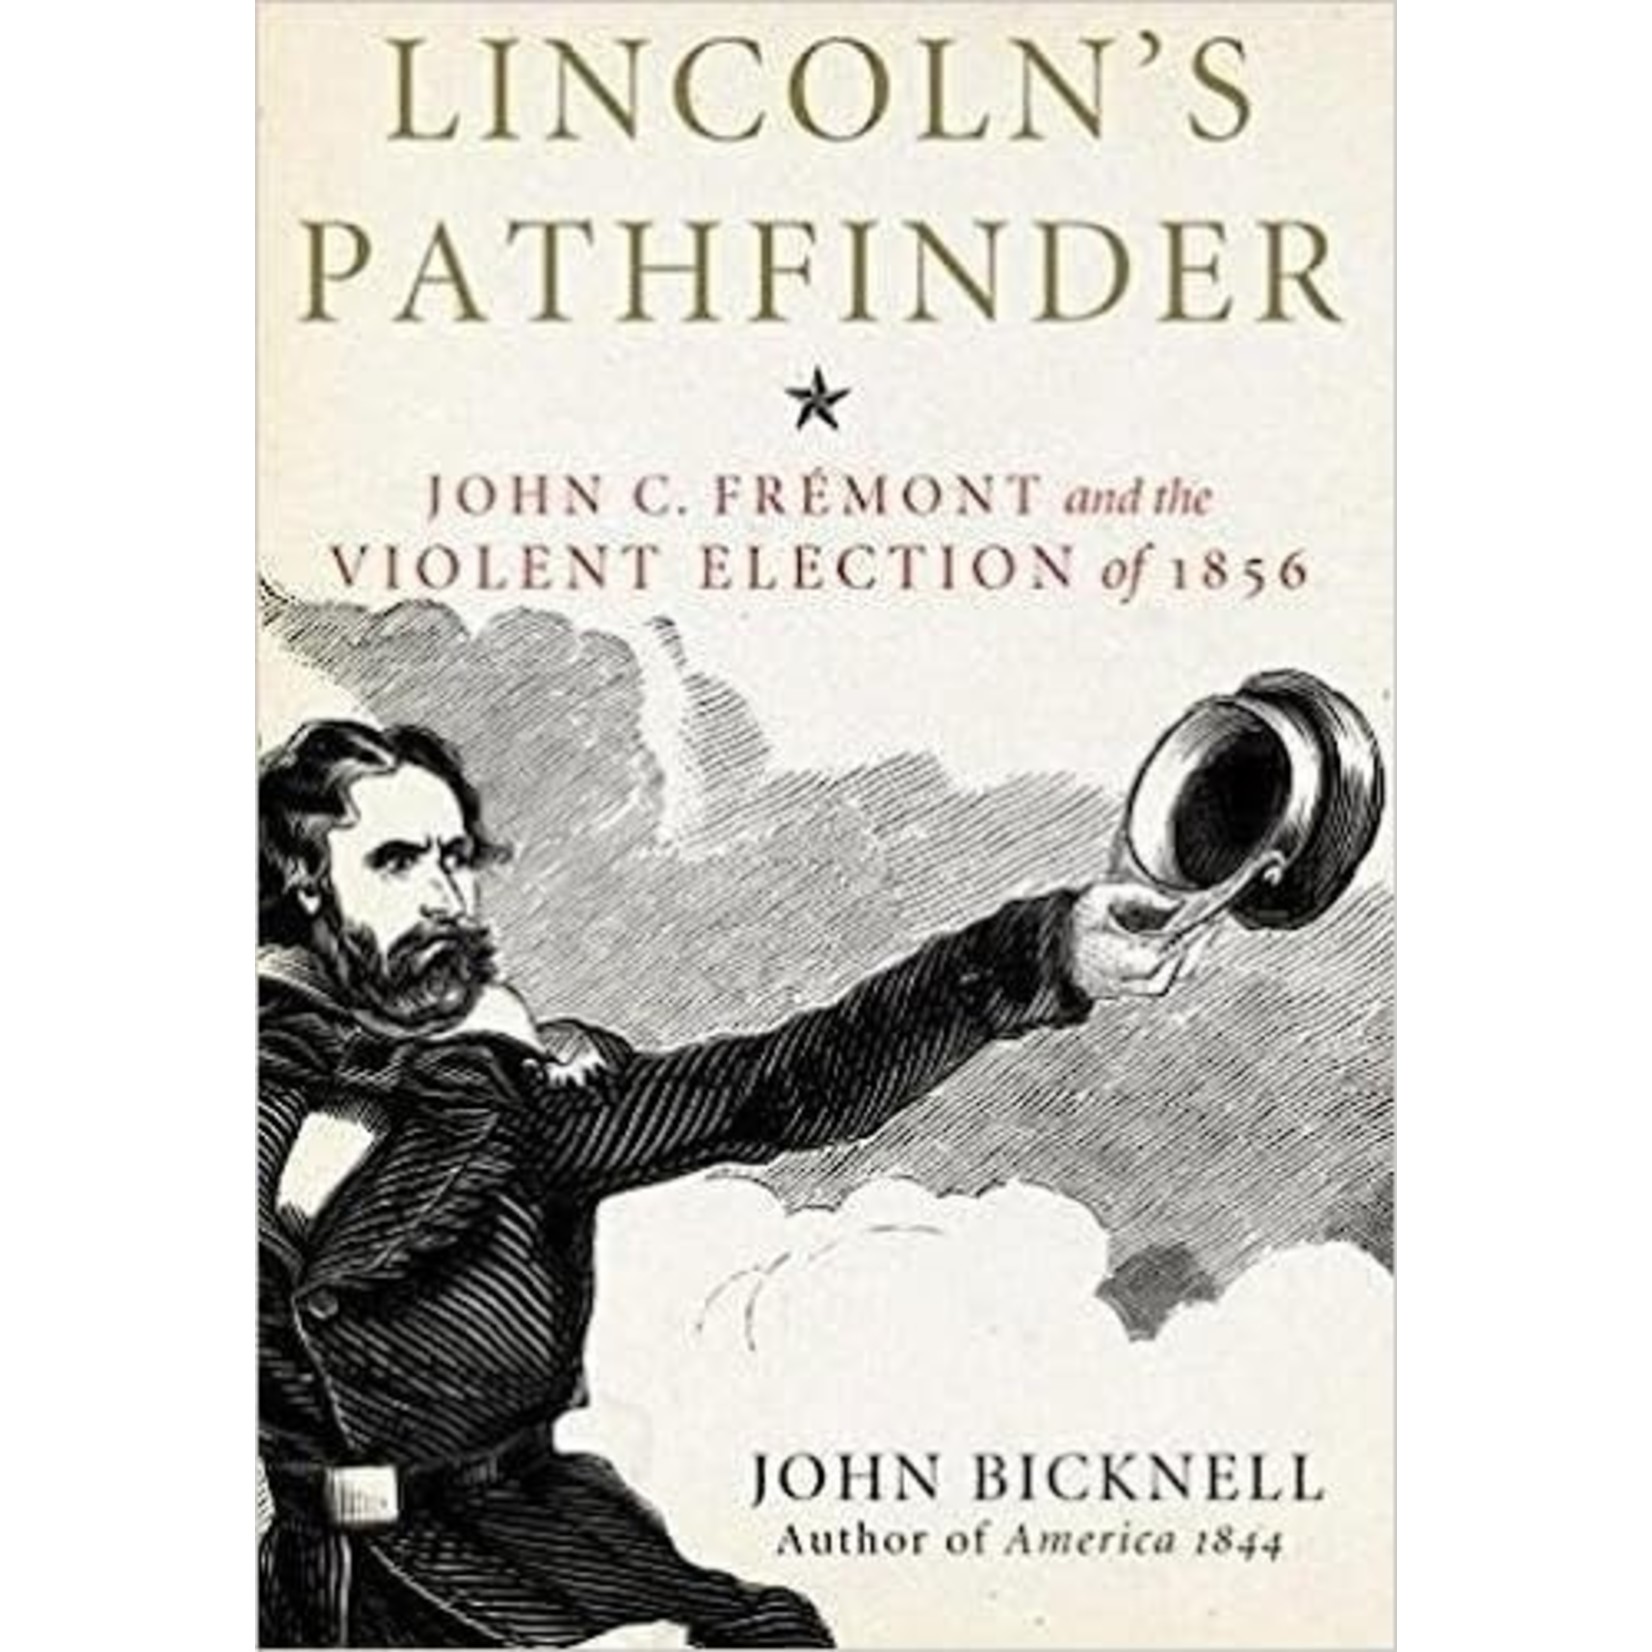 Lincoln's Pathfinder by John Bicknell- Hardcover